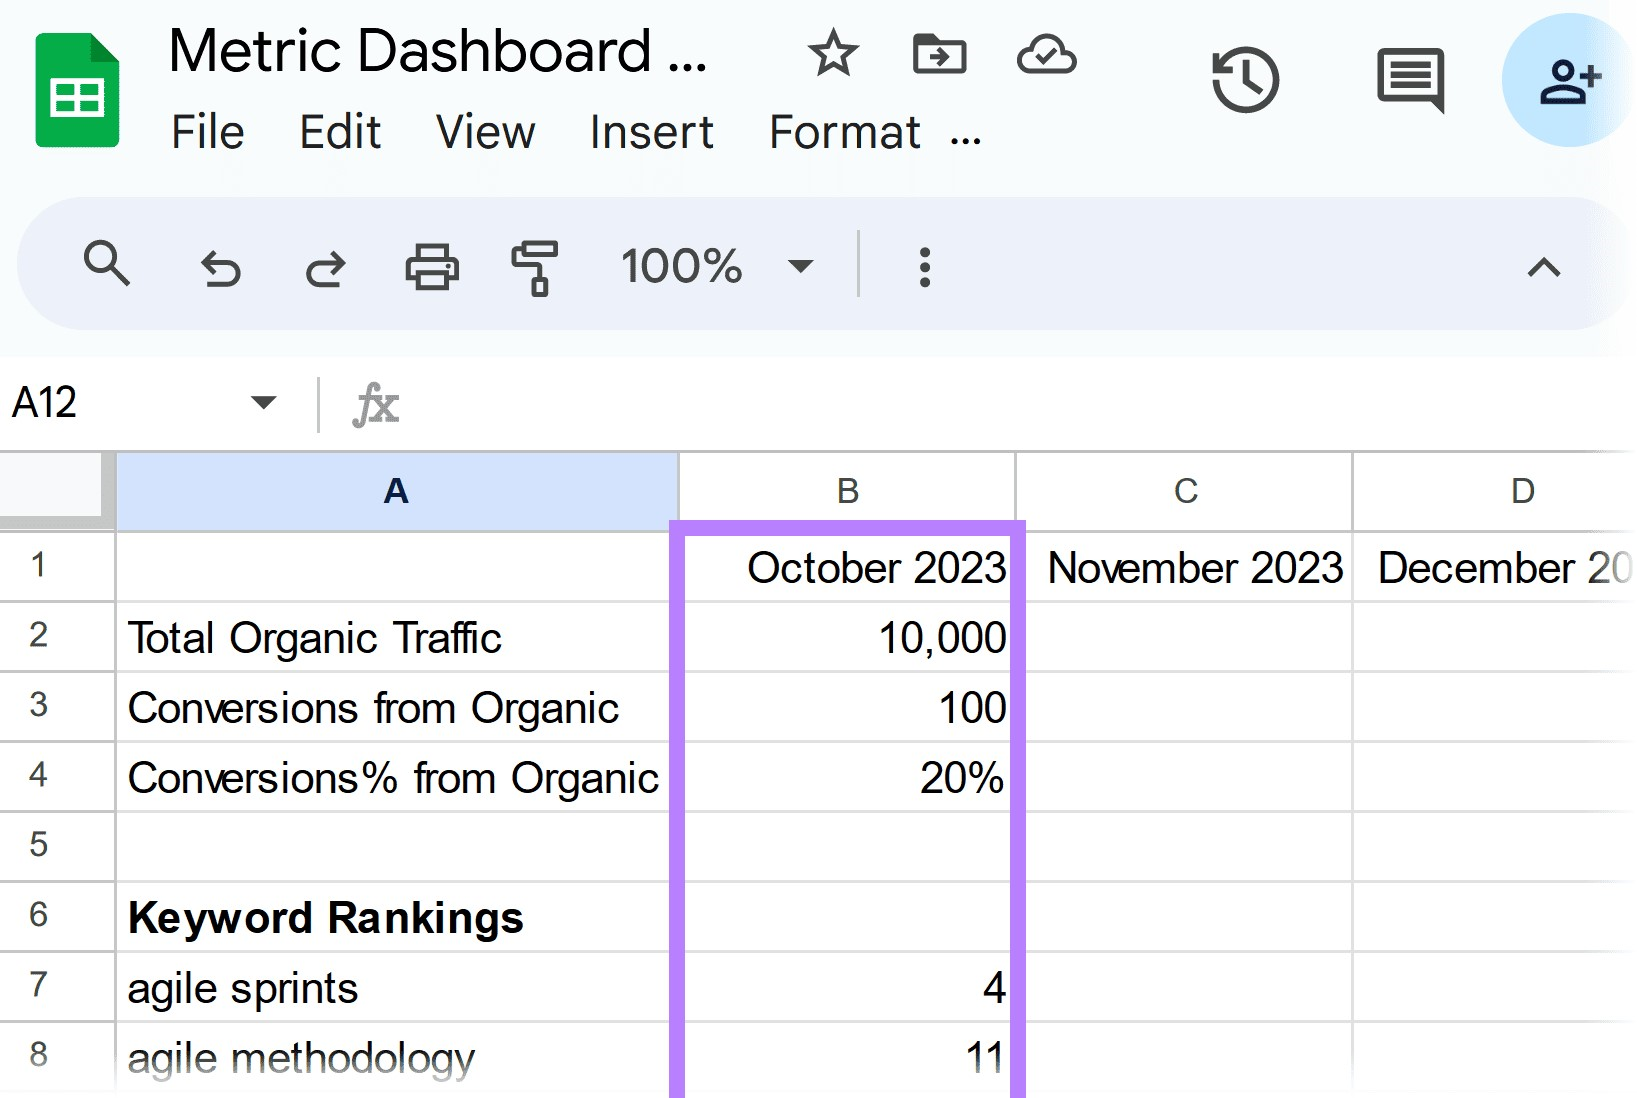 Data added to "Metric Dashboard Example" sheet